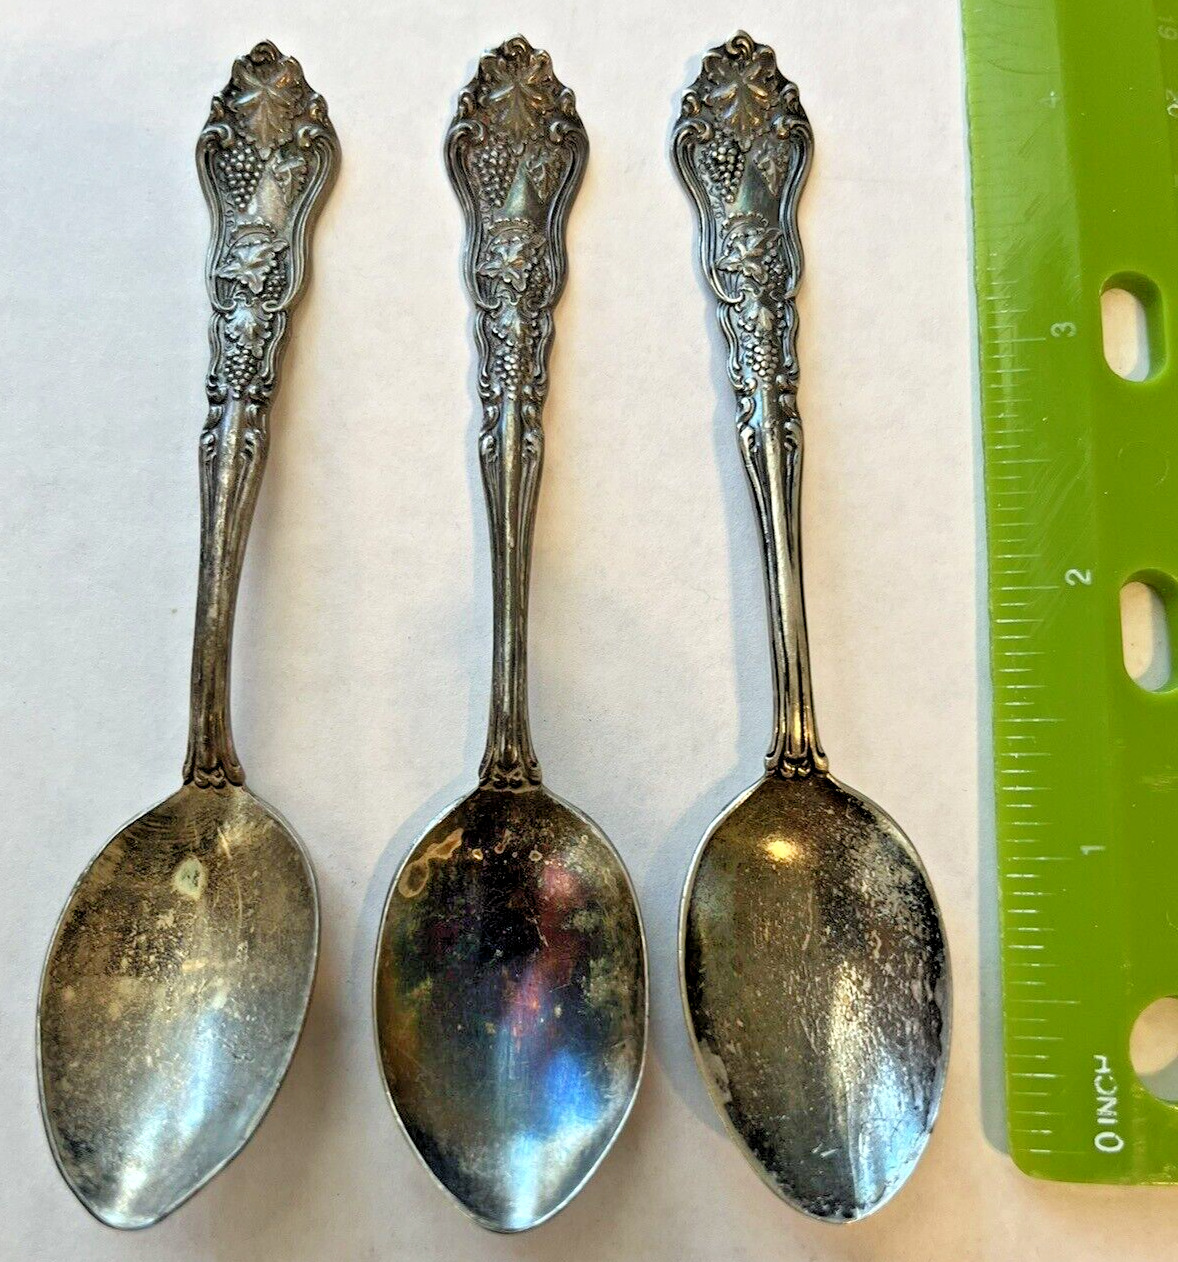 3 Vintage ABCO Silver Plate Spoons Pat 4.10-06 Ornate Grapes